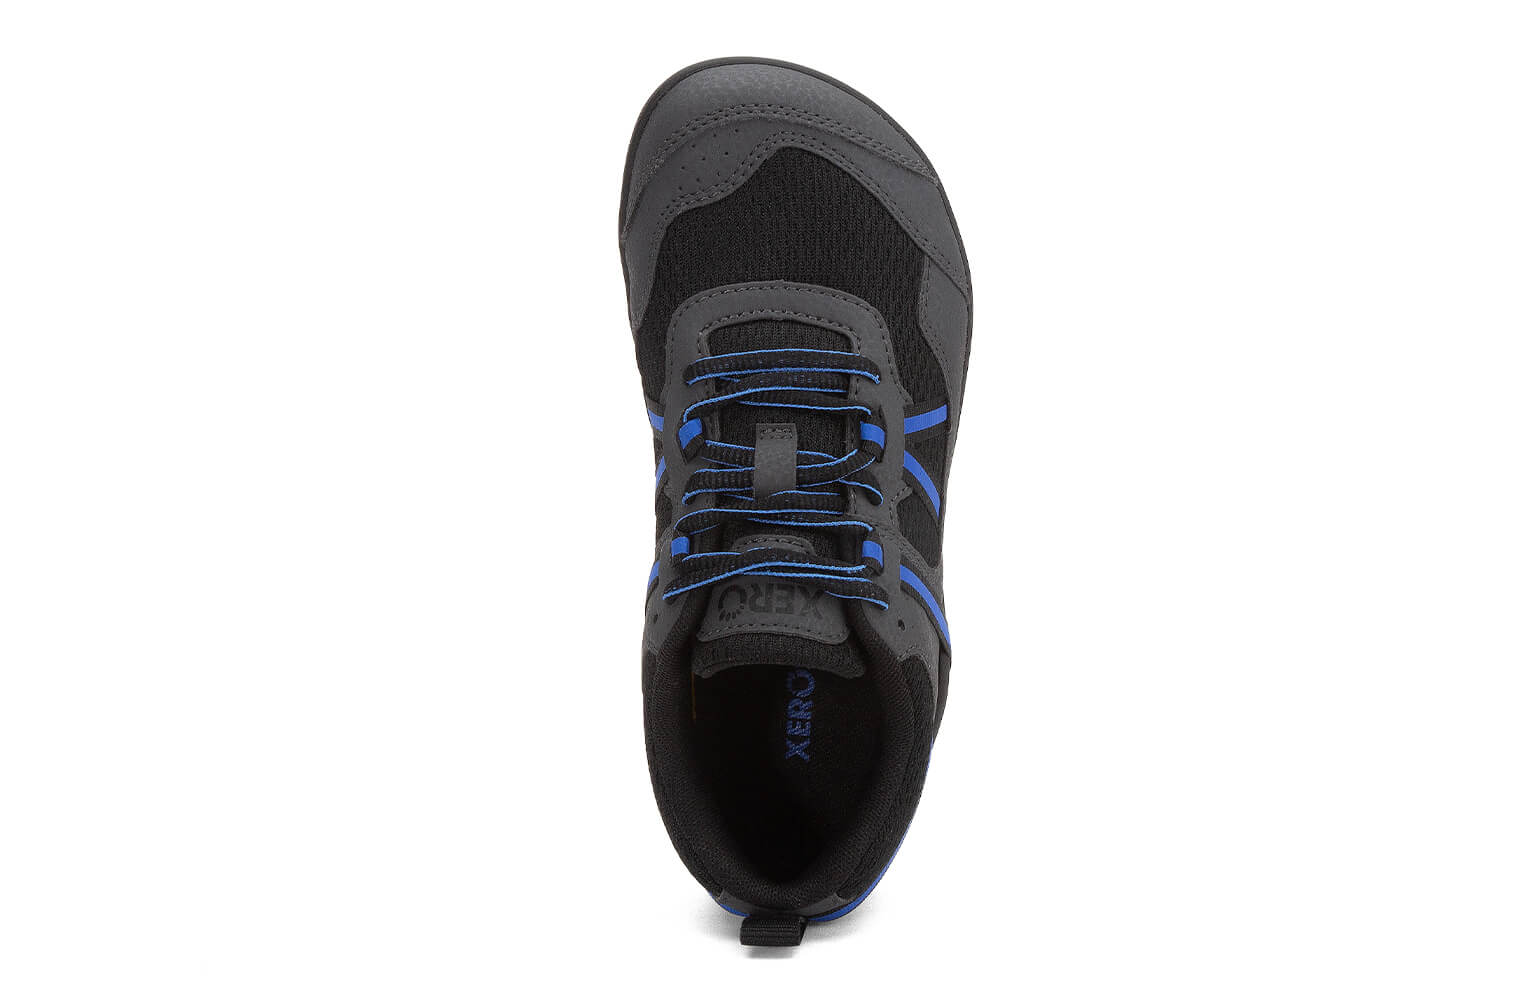 Kids Minimalist Barefoot Athletic Shoe - Prio by Xero Shoes